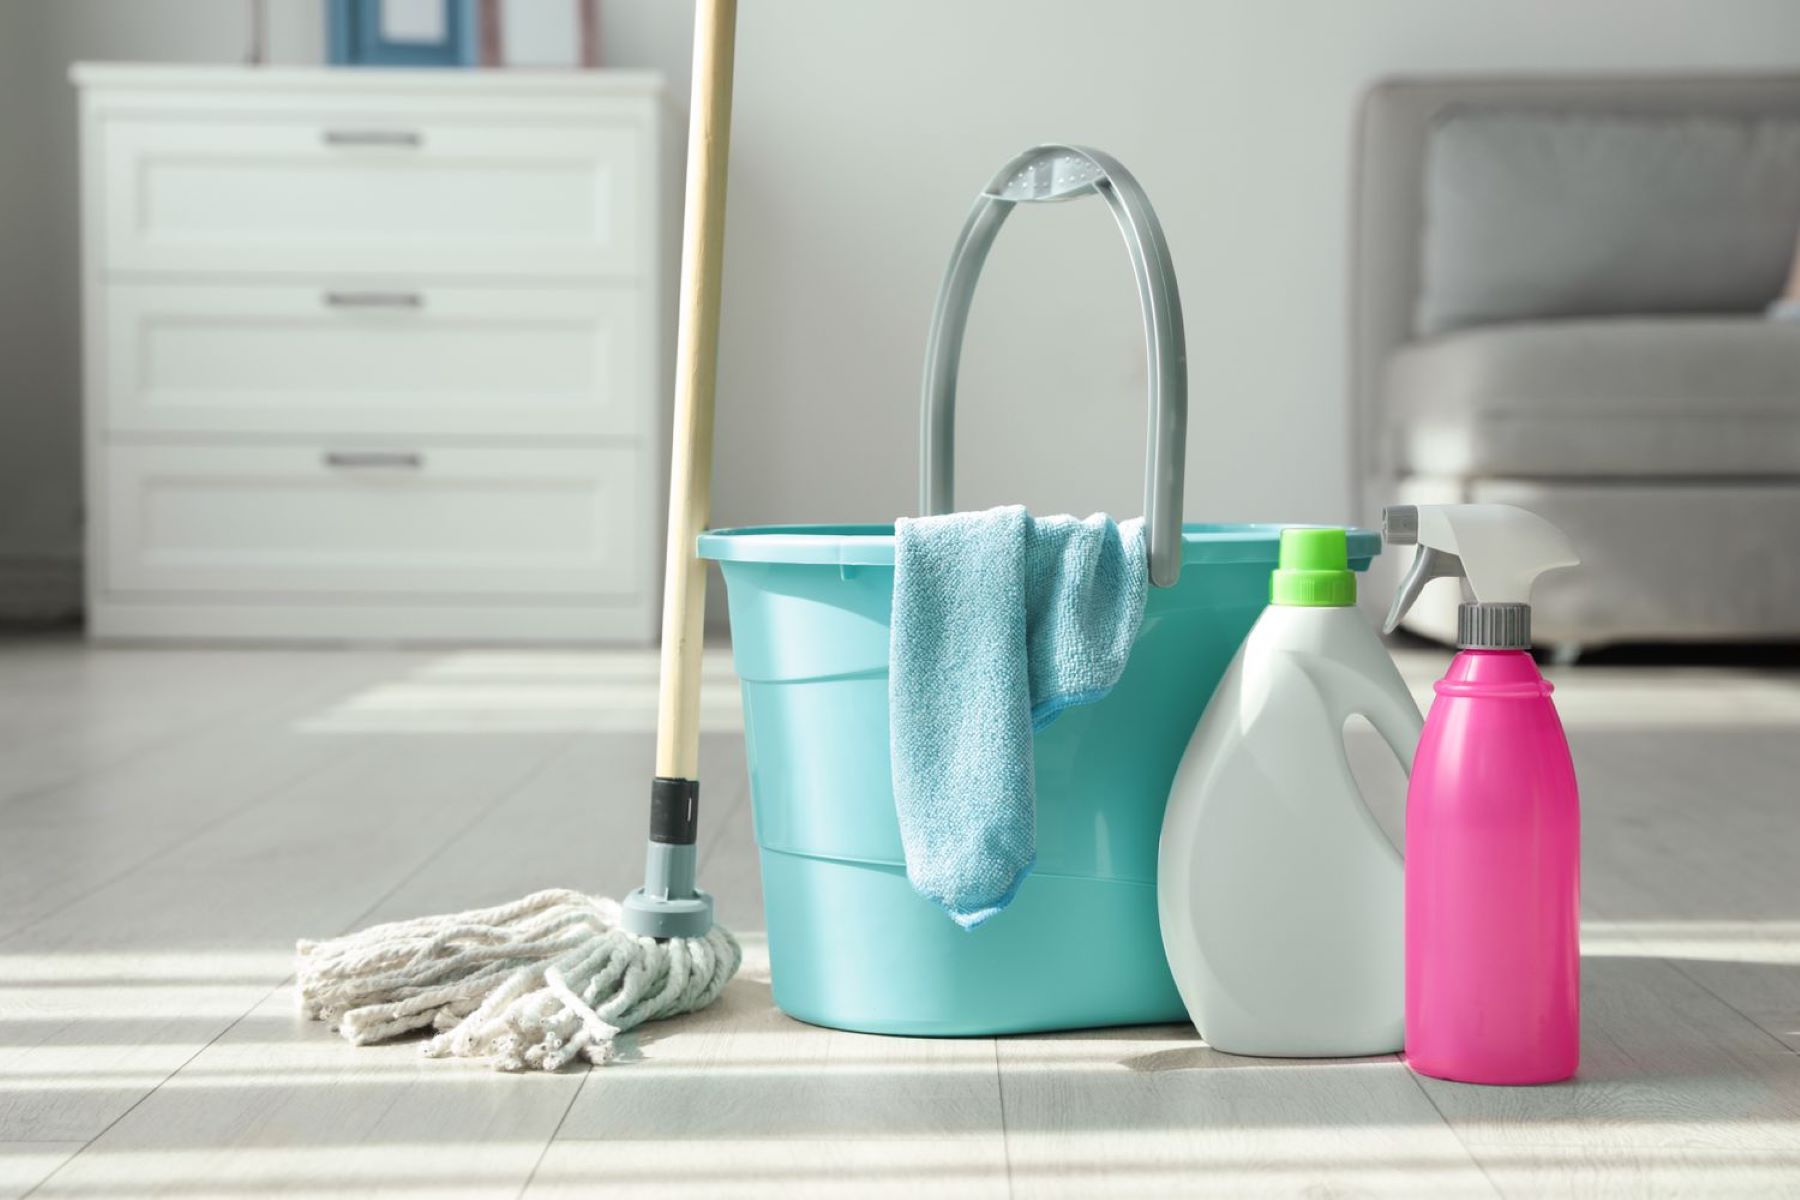 What To Put In Mop Water To Make House Smell Good